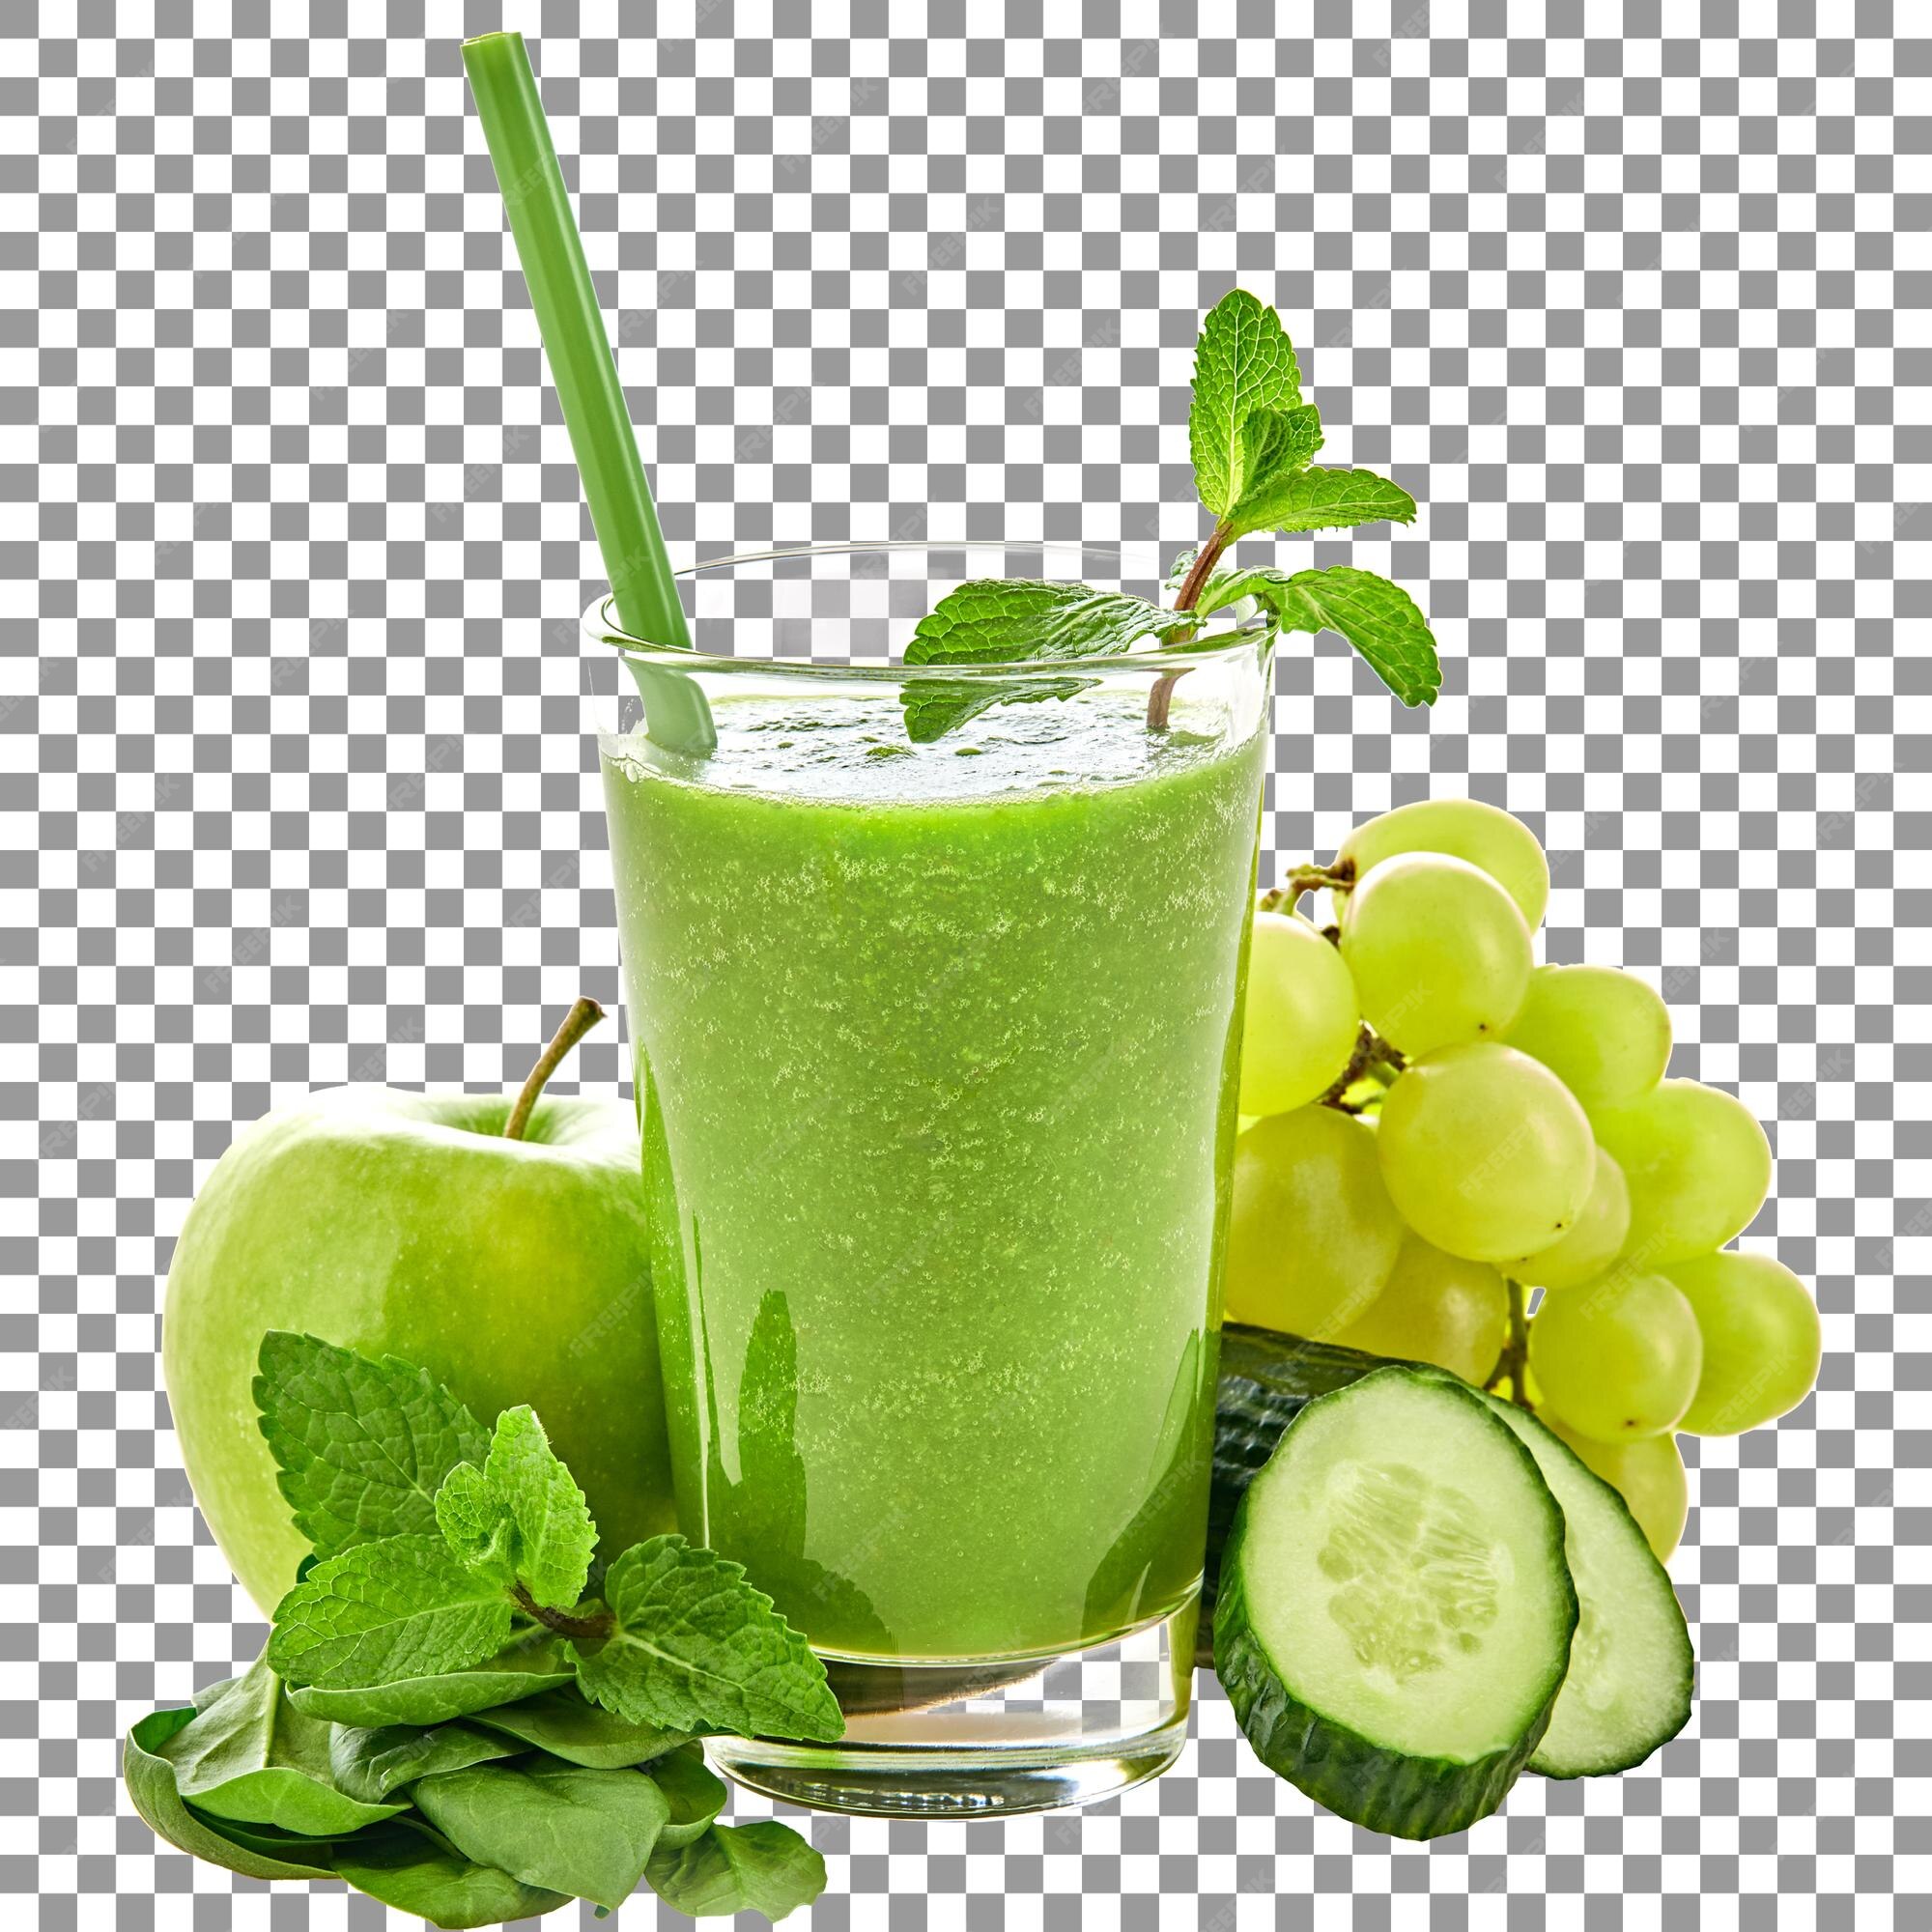 Premium PSD  A glass of green smoothie with a straw and fruits on